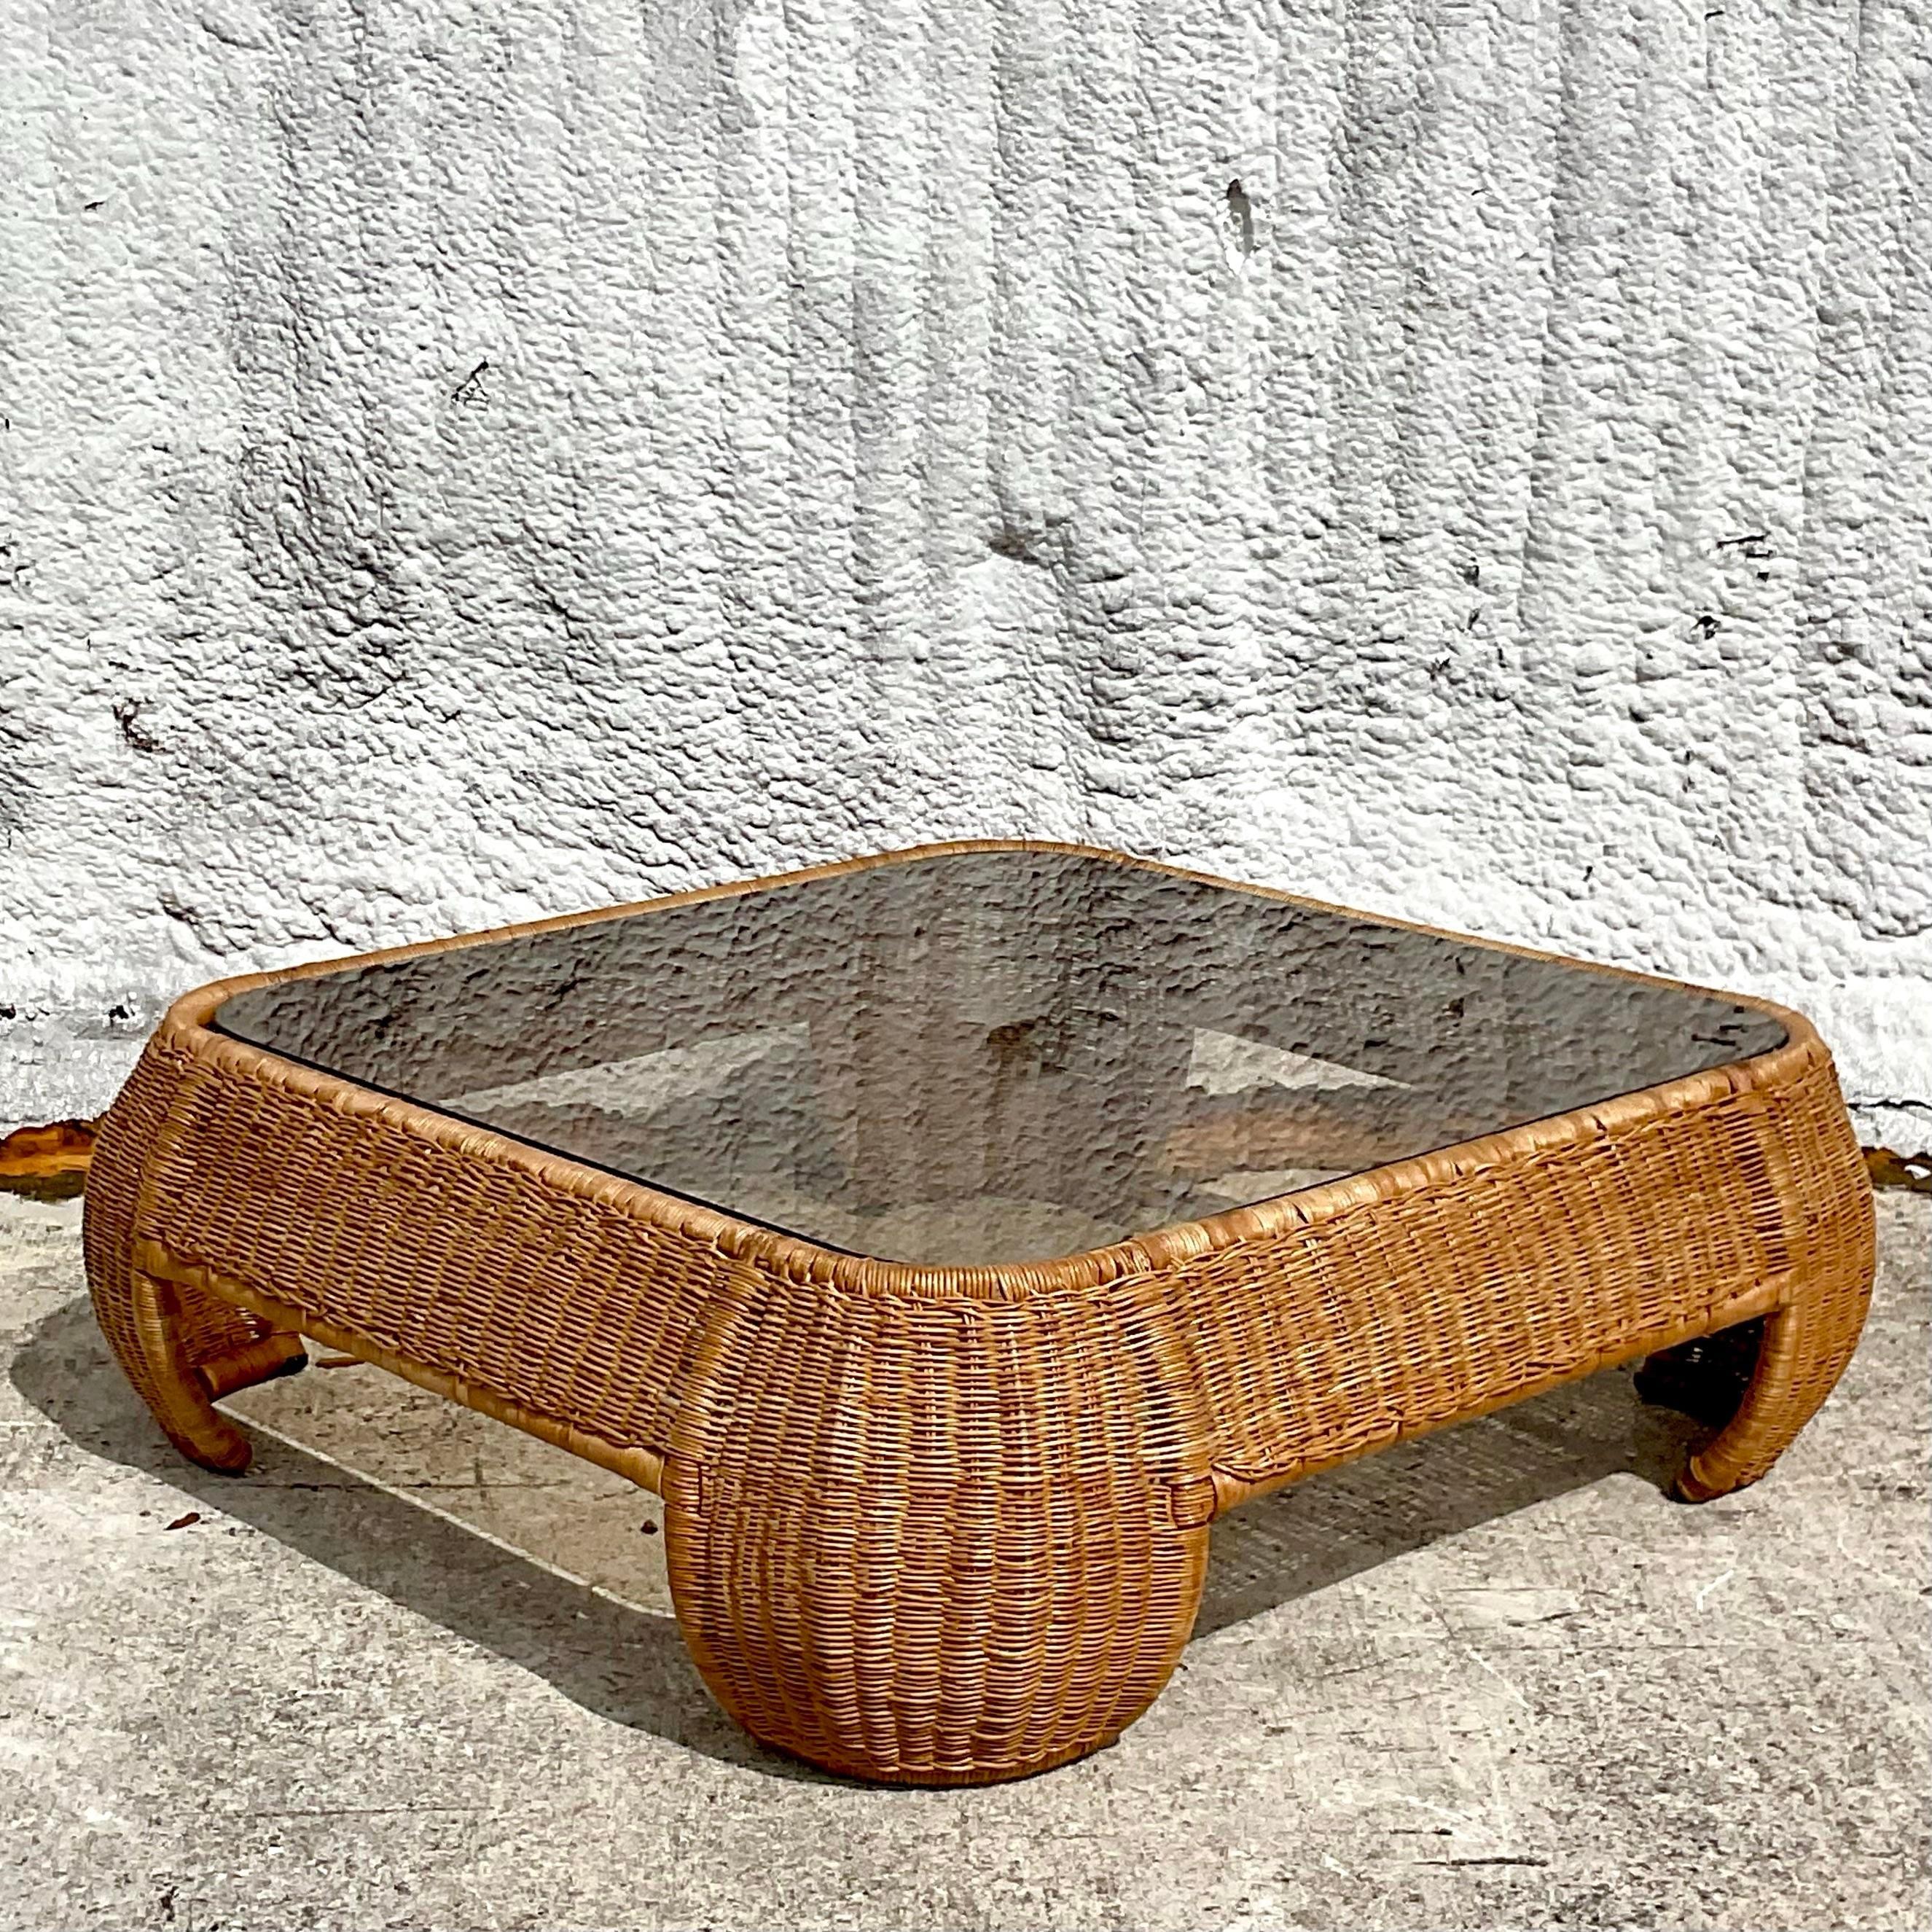 Infuse your living space with coastal elegance through this vintage woven rattan coffee table. Inspired by the relaxed vibes of American coastal living, its intricate design adds a touch of natural beauty and warmth to any room. Perfect for